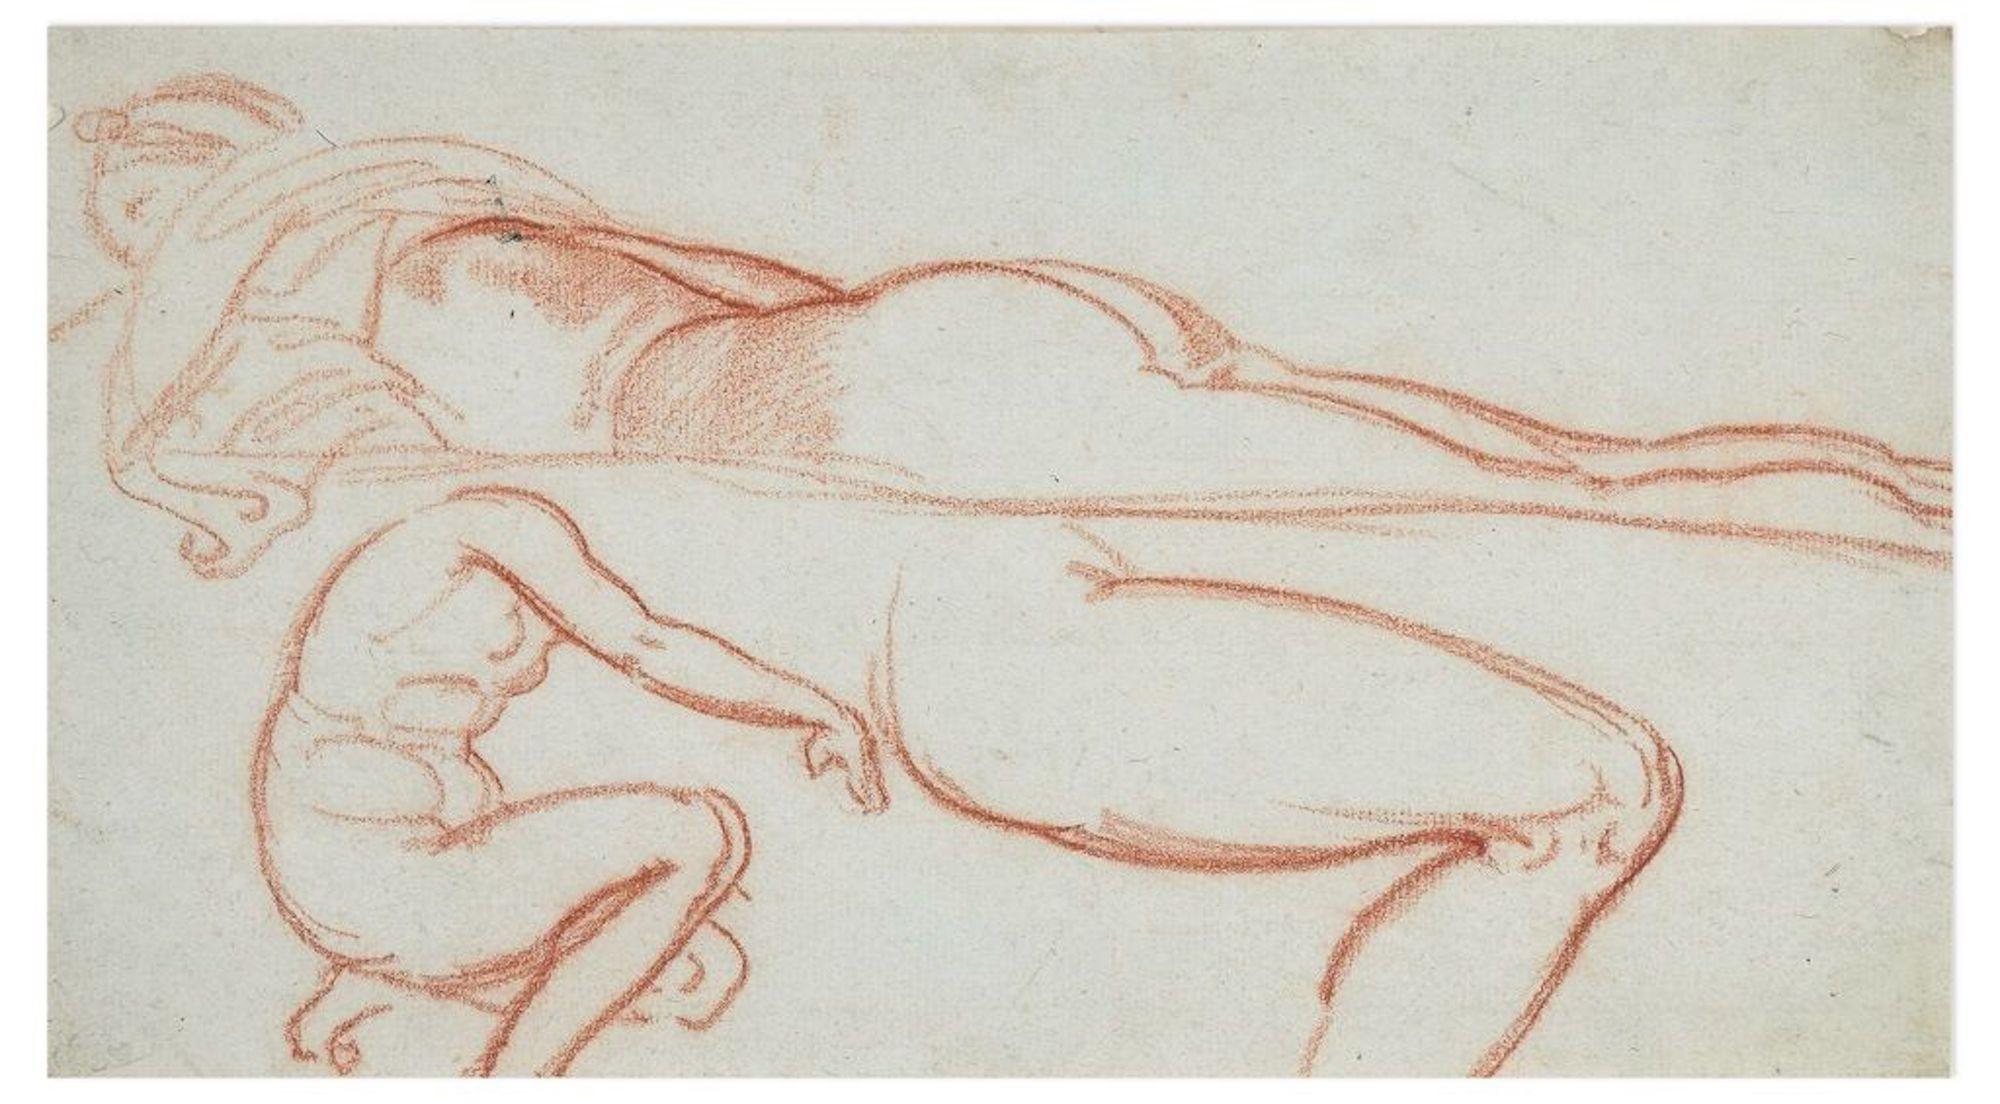 Pierre Andrieu Figurative Art - Studies for a Female Nude - Original Pastel Drawing by P. Andrieu - Late 1800